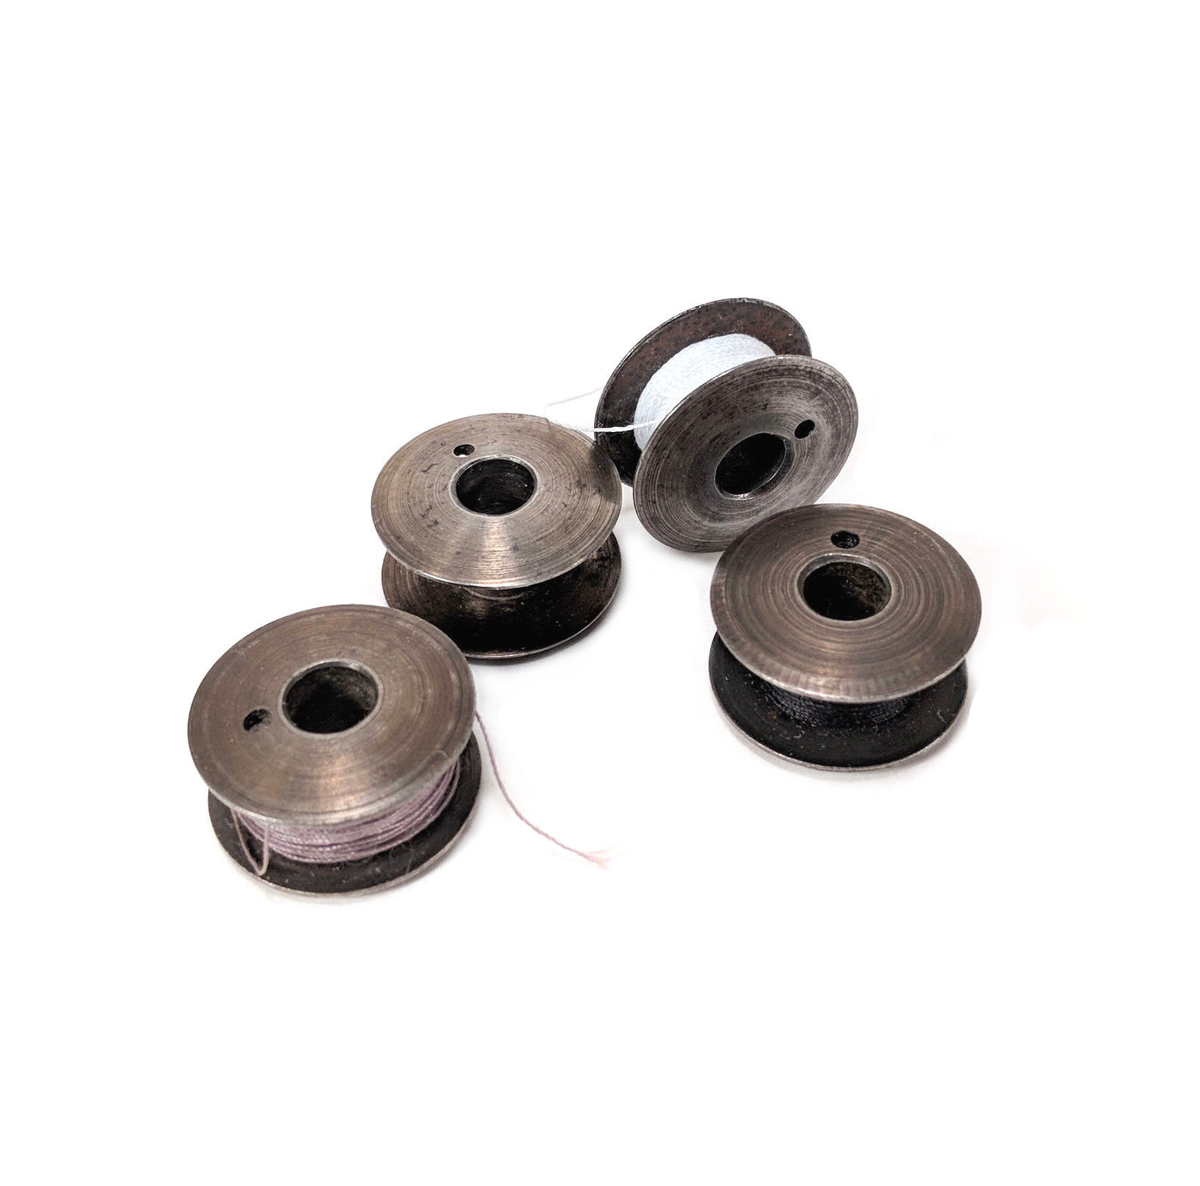 Blister of 5 rounded bobbins, for sewing machines, in 66 K steel